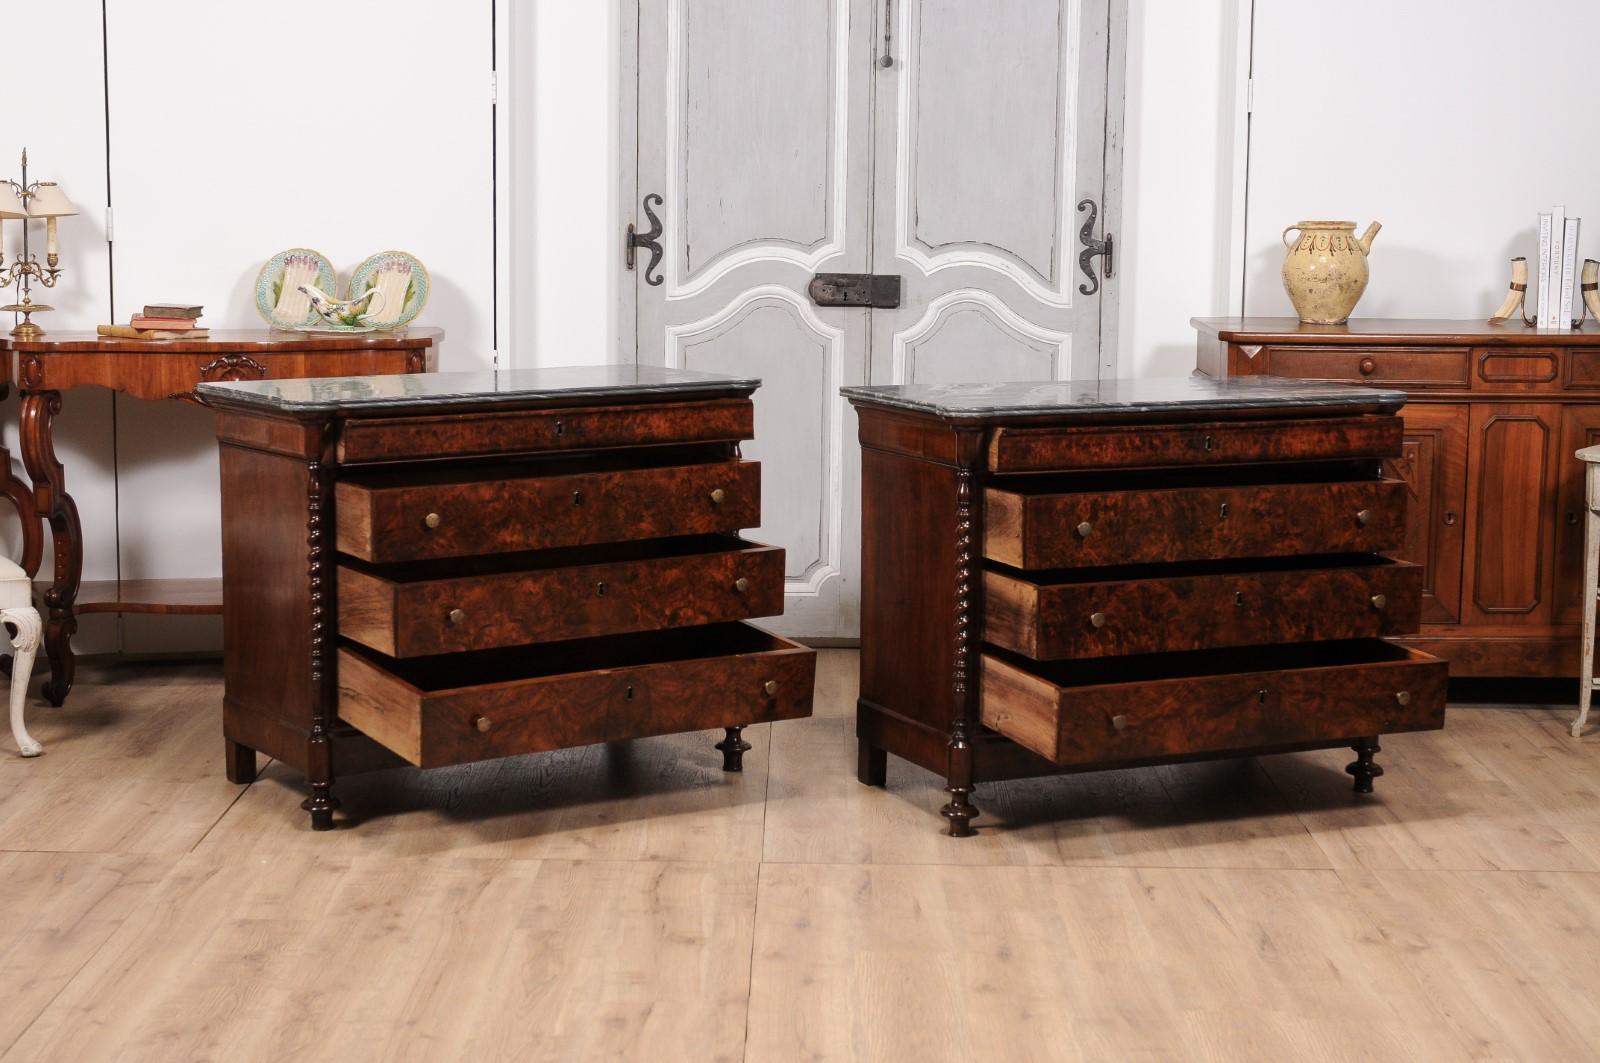 Italian 1830s Burl Walnut Commodes from Lombardi with Gray Marble Tops, a Pair In Good Condition For Sale In Atlanta, GA